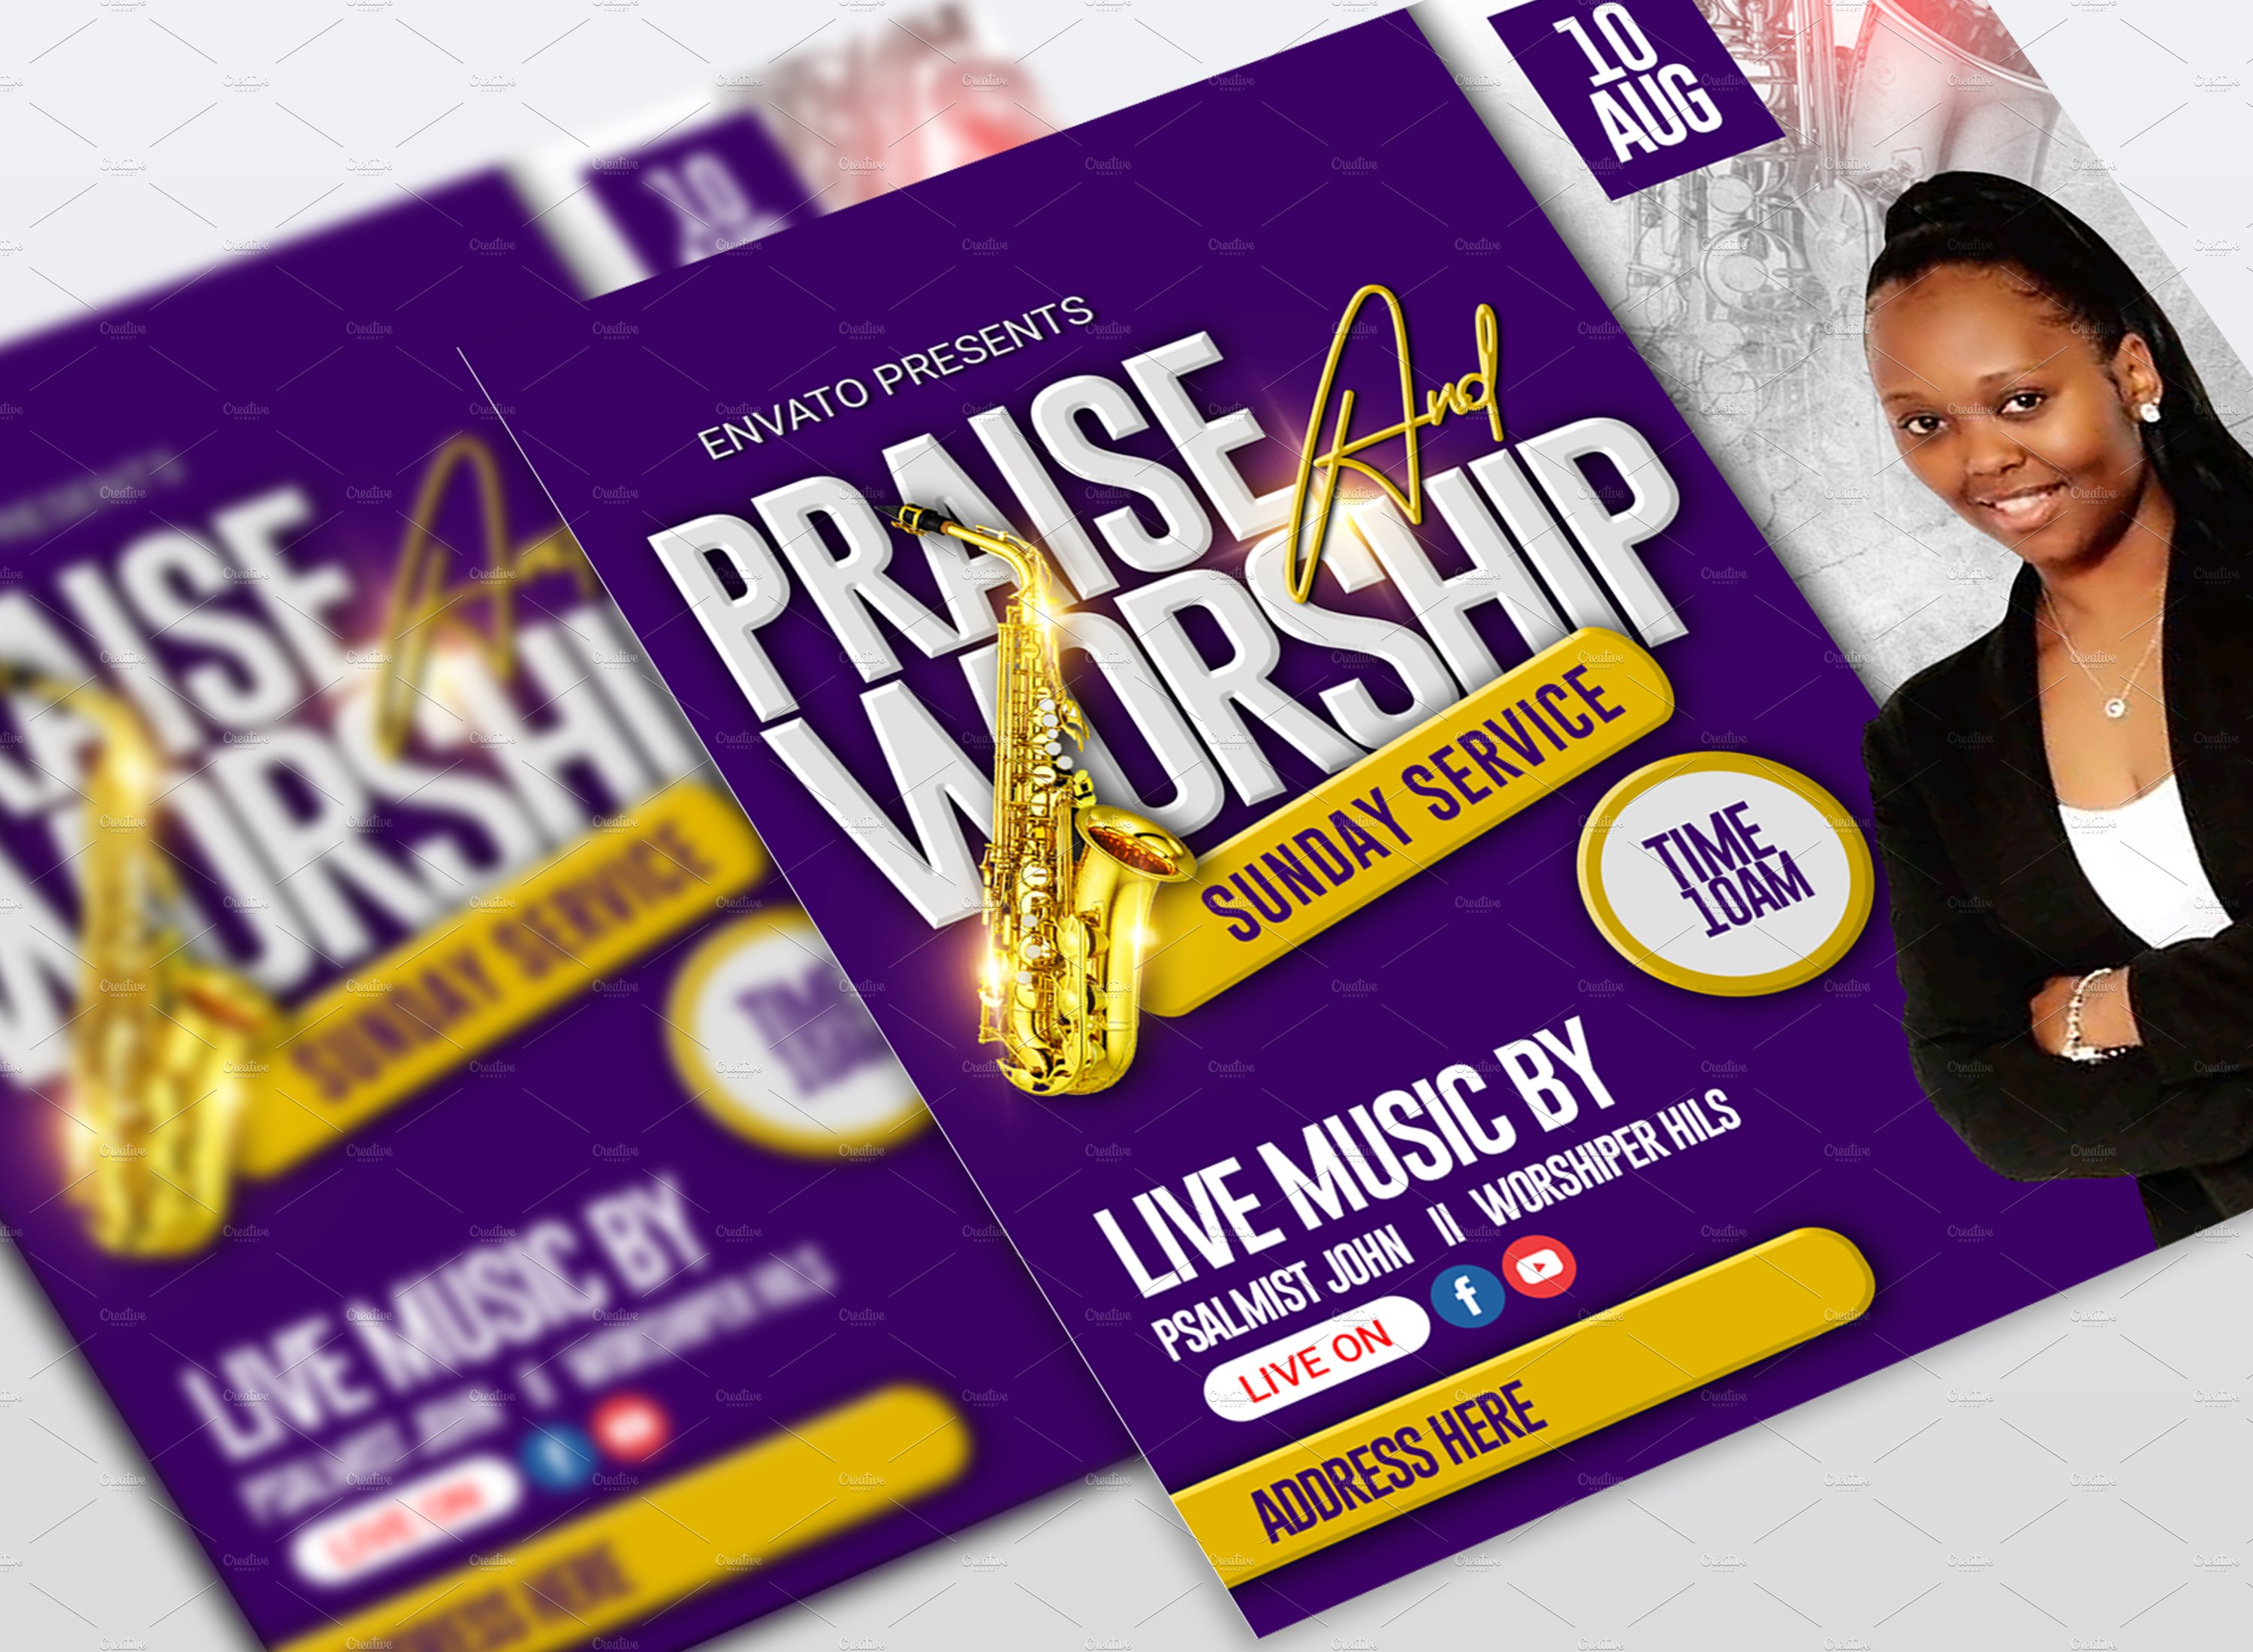 Praise and worship church flyer cover image.